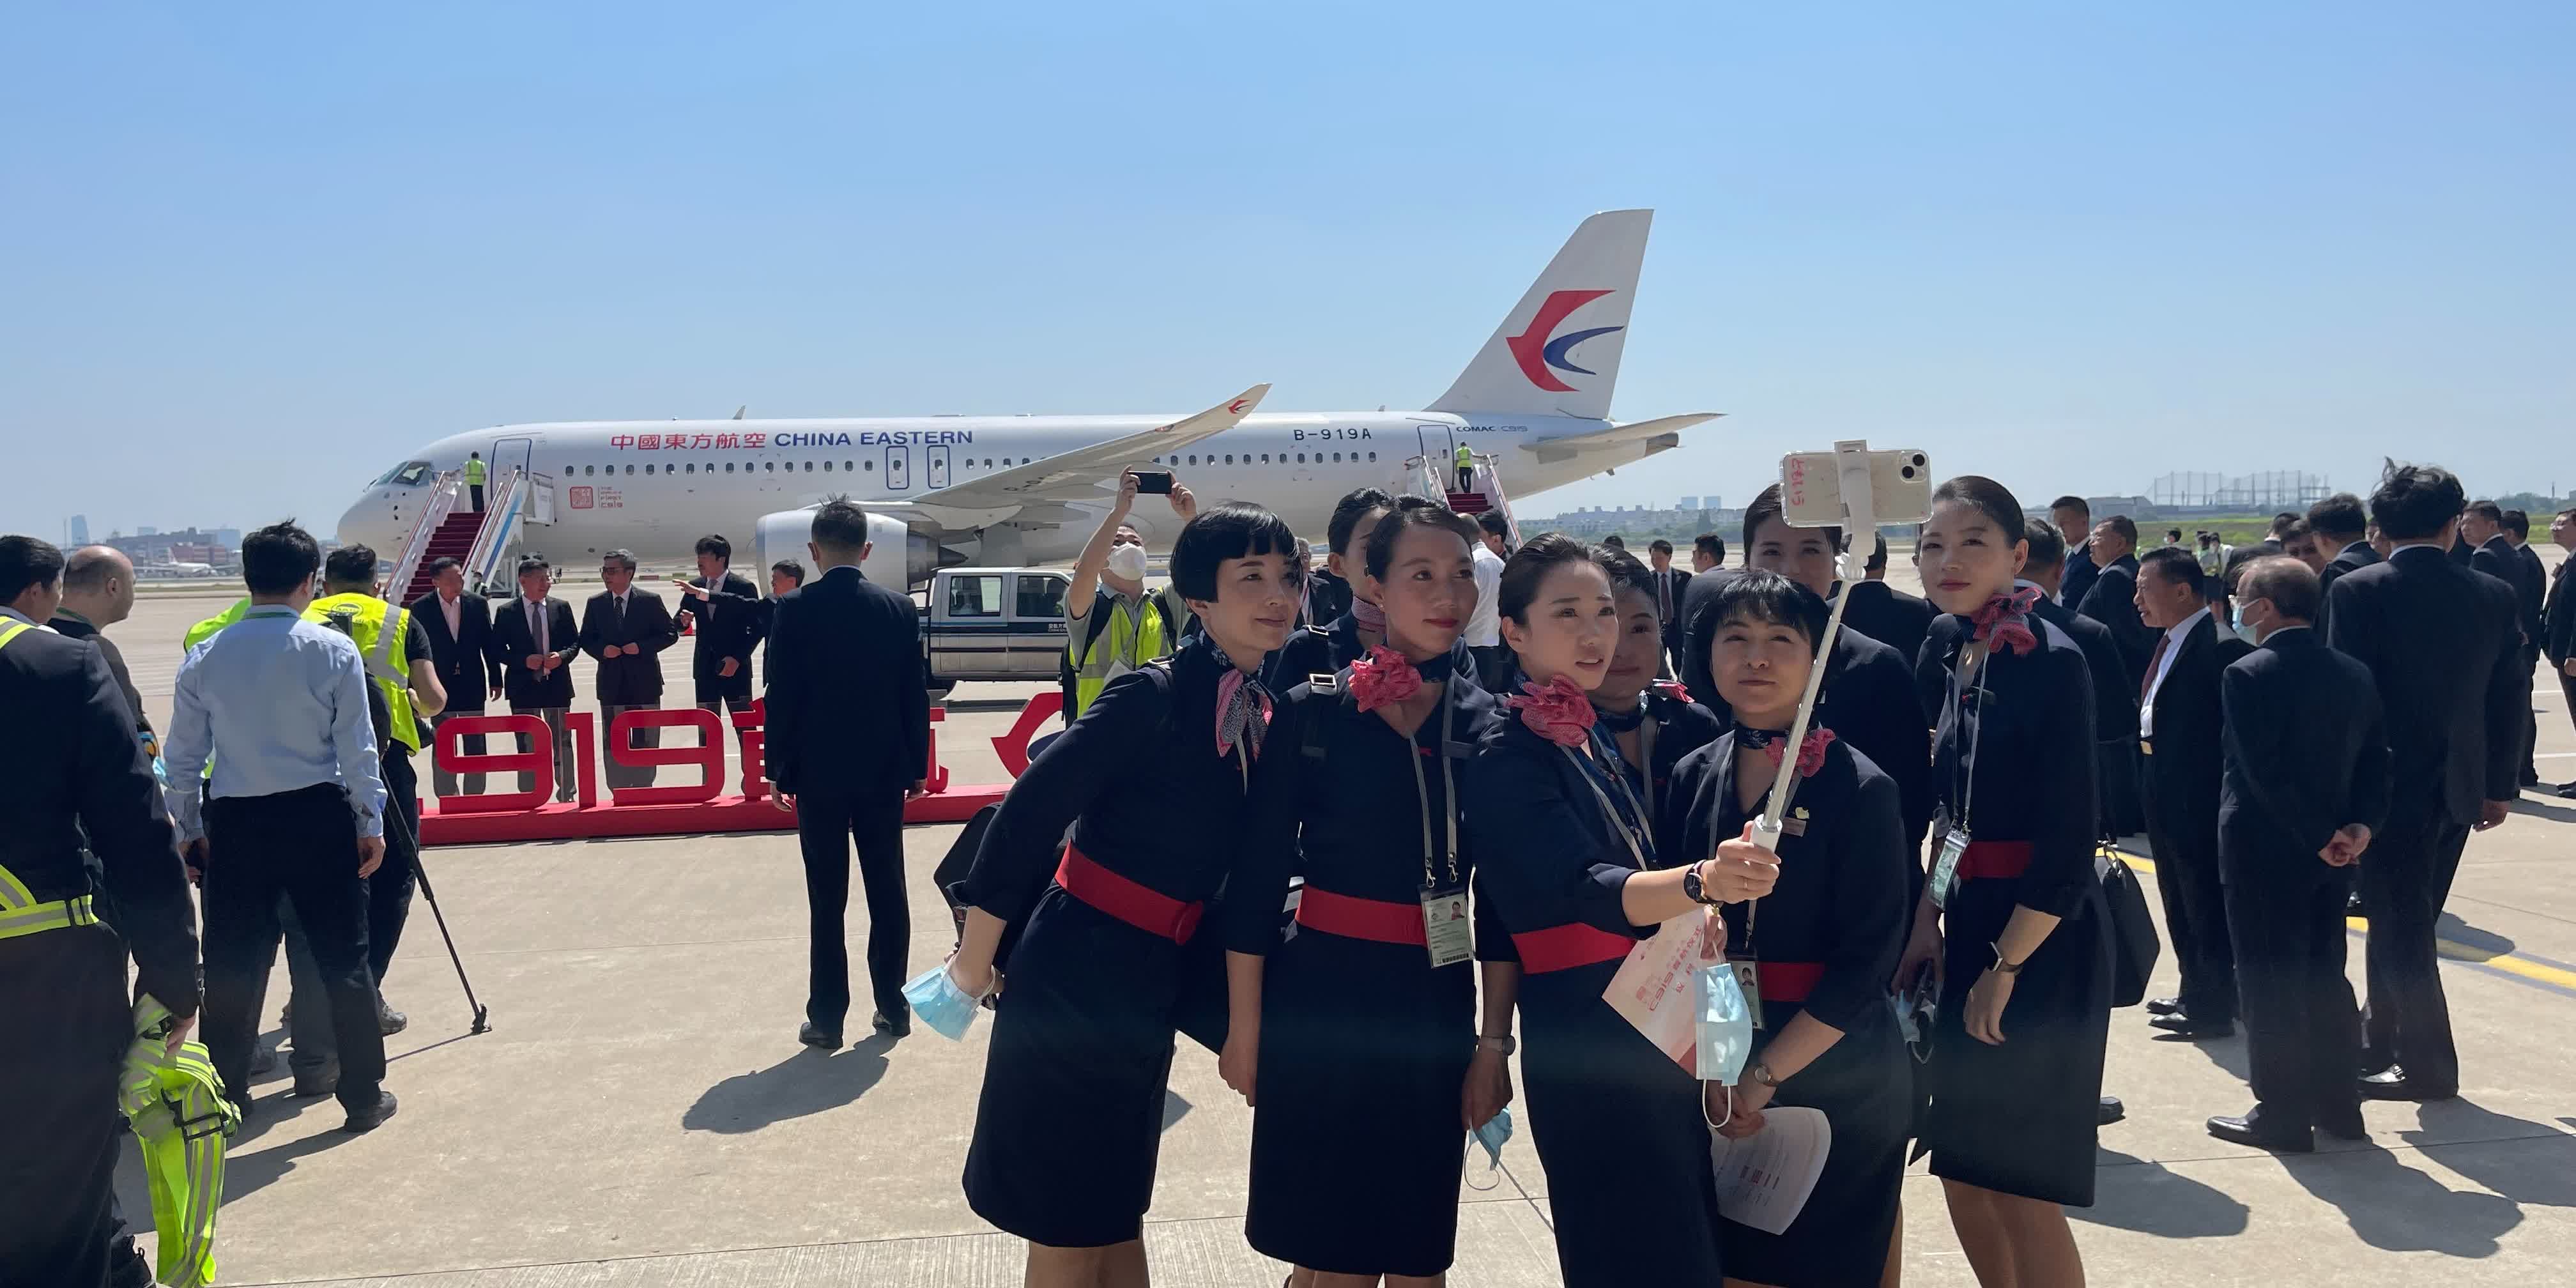 Photos | Passengers take photos in front of C919 aircraft before inaugural flight